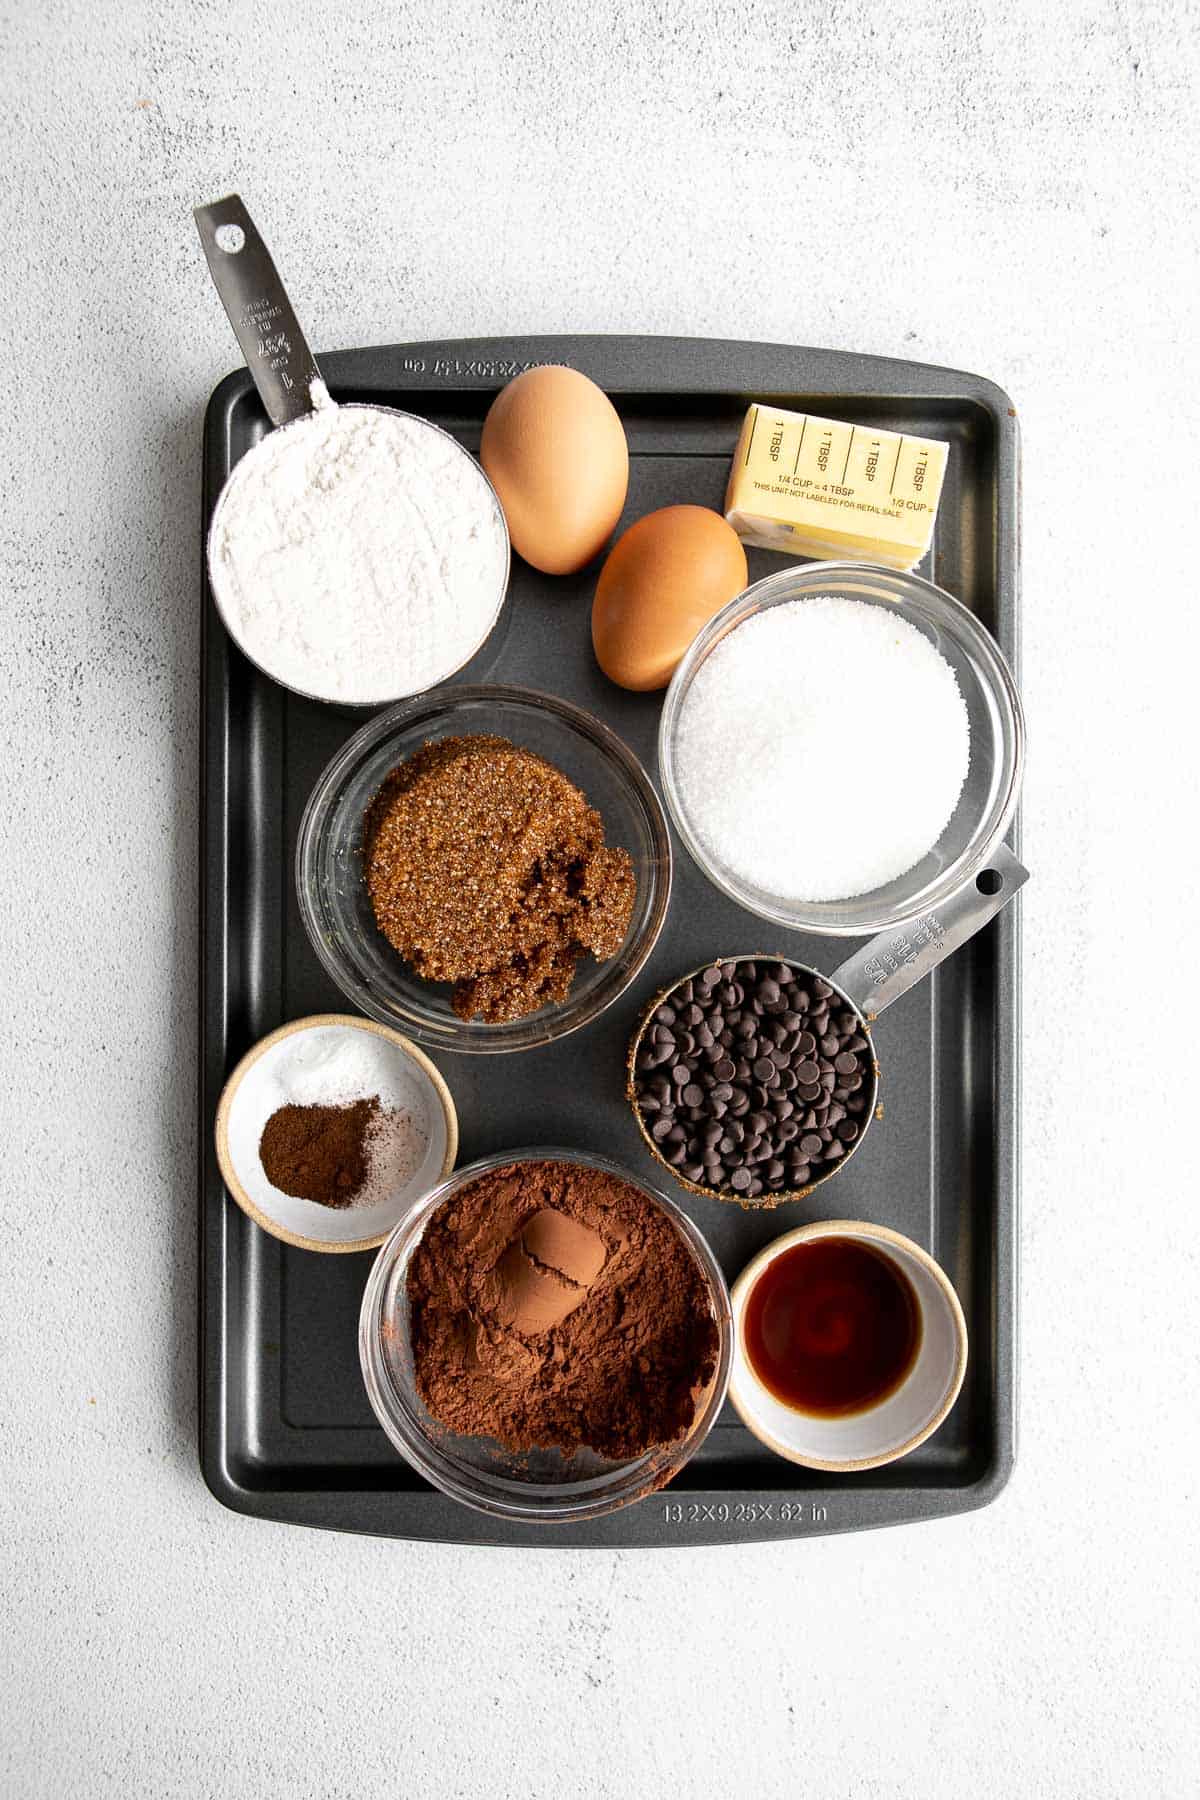 ingredients for the cookies in small bowls